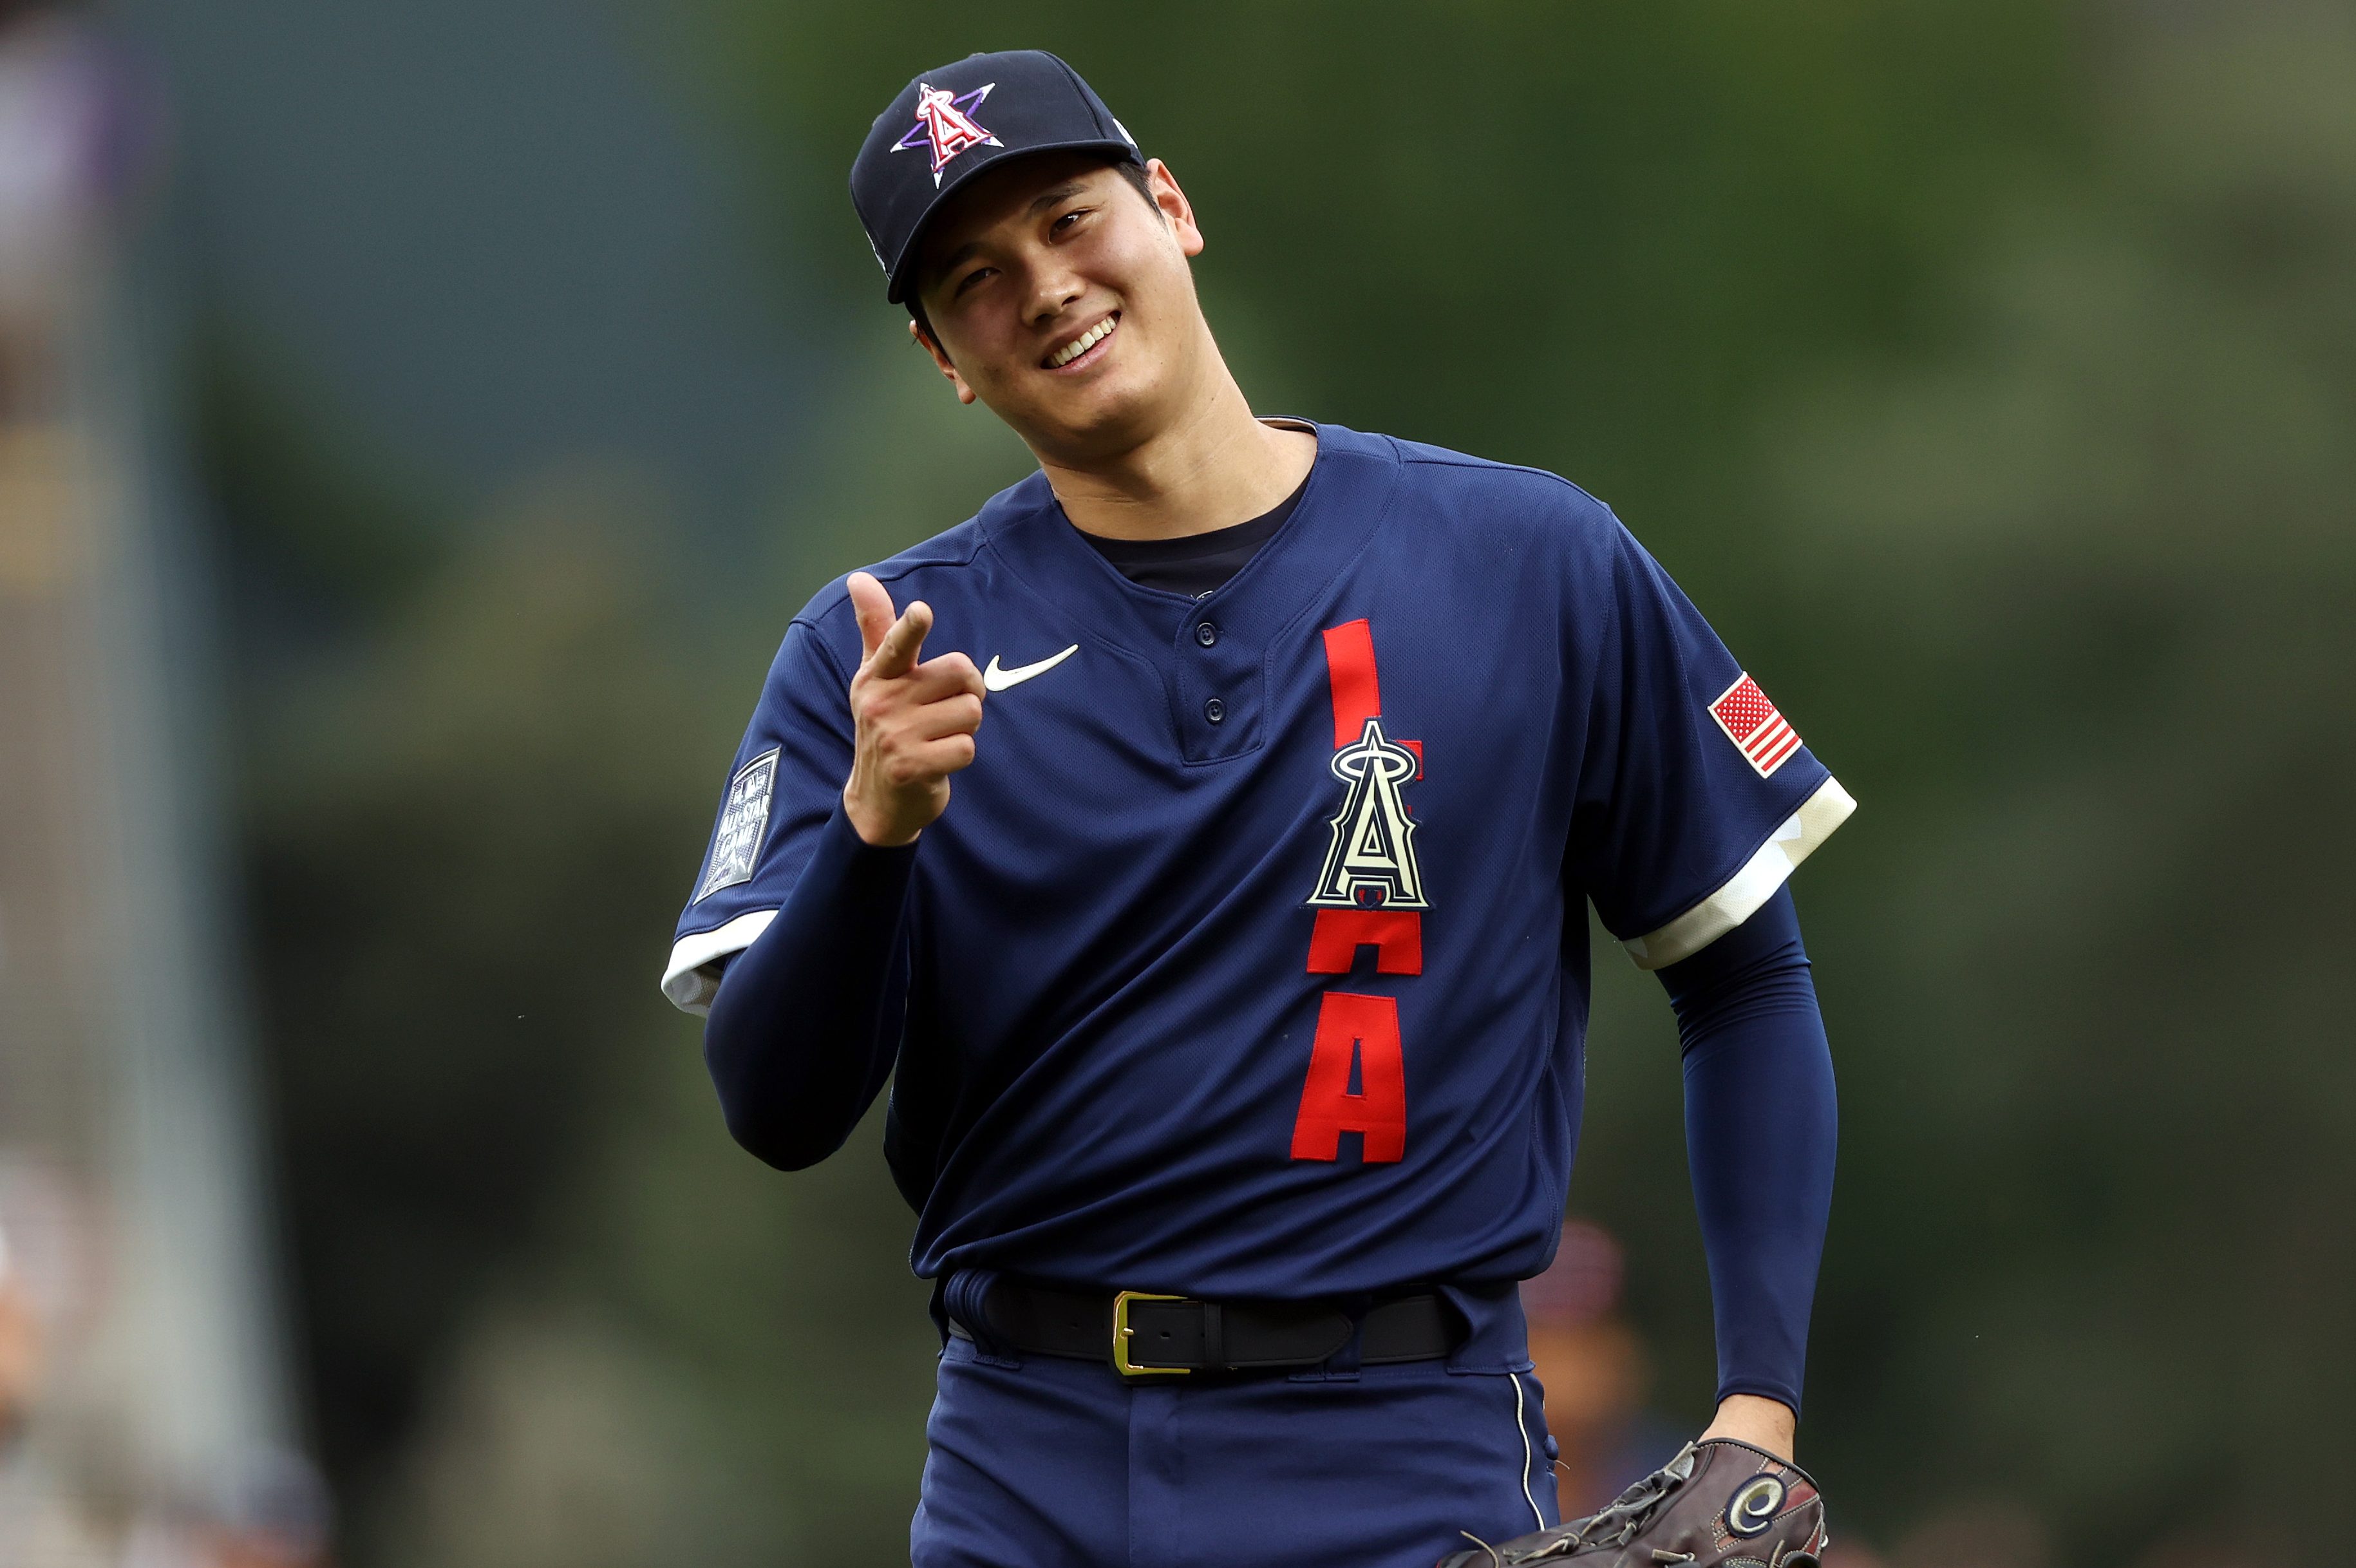 Shohei Ohtani during the 91st MLB All-Star Game